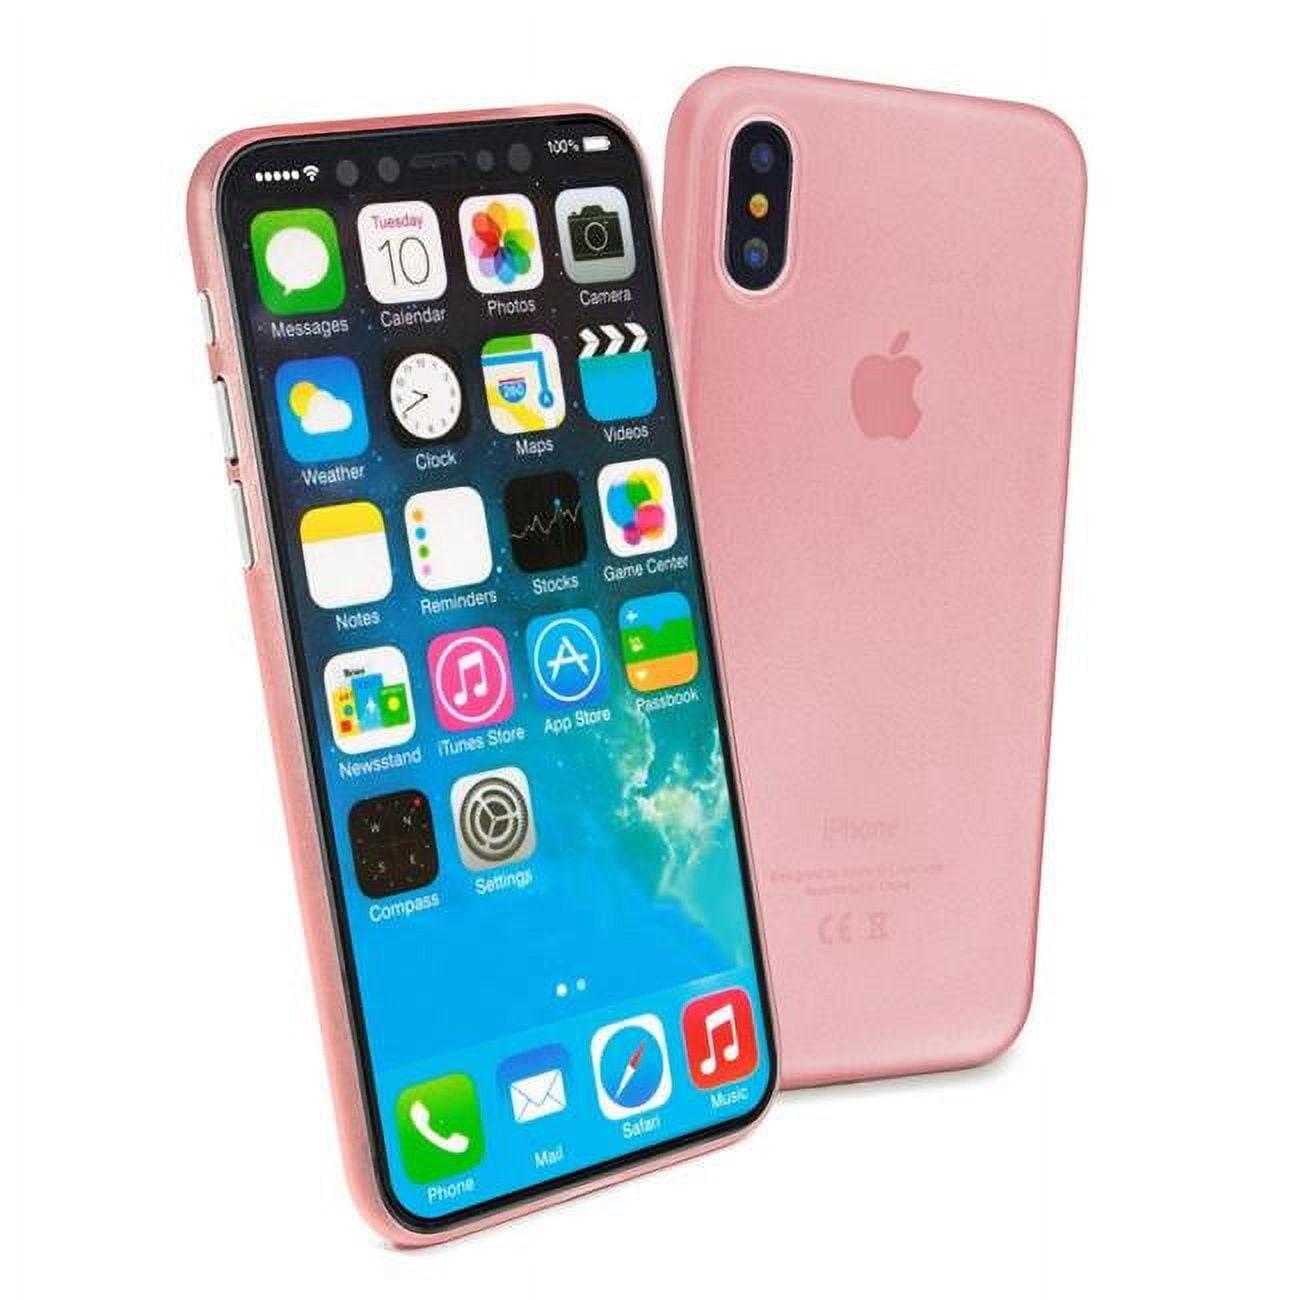 Picture of Tuff-luv B10-98 Rigid Ultra-thin & Light Weight Skin Case for Apple iPhone X, Rose Gold